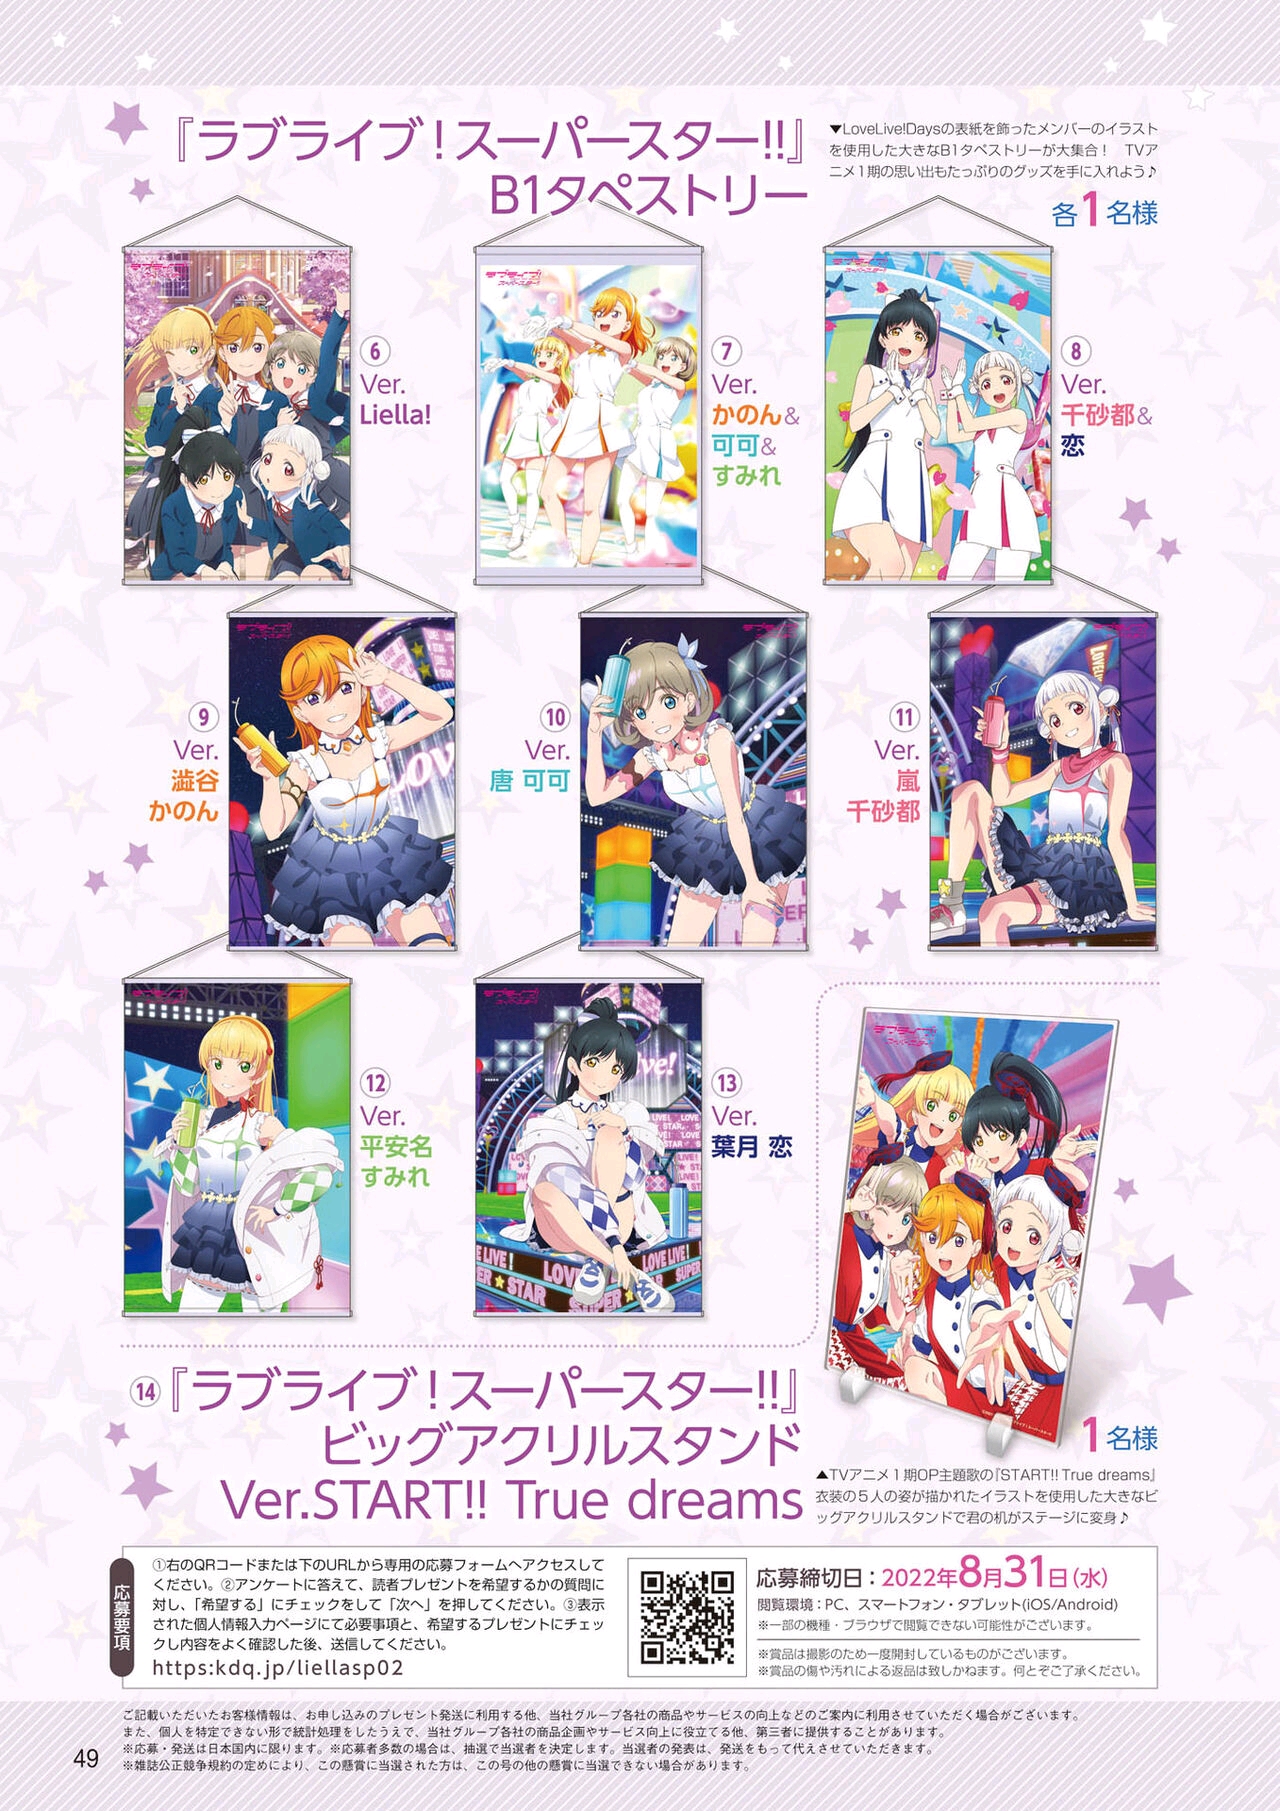 LoveLive!Days Liella! SPECIAL Vol.02 2022 May